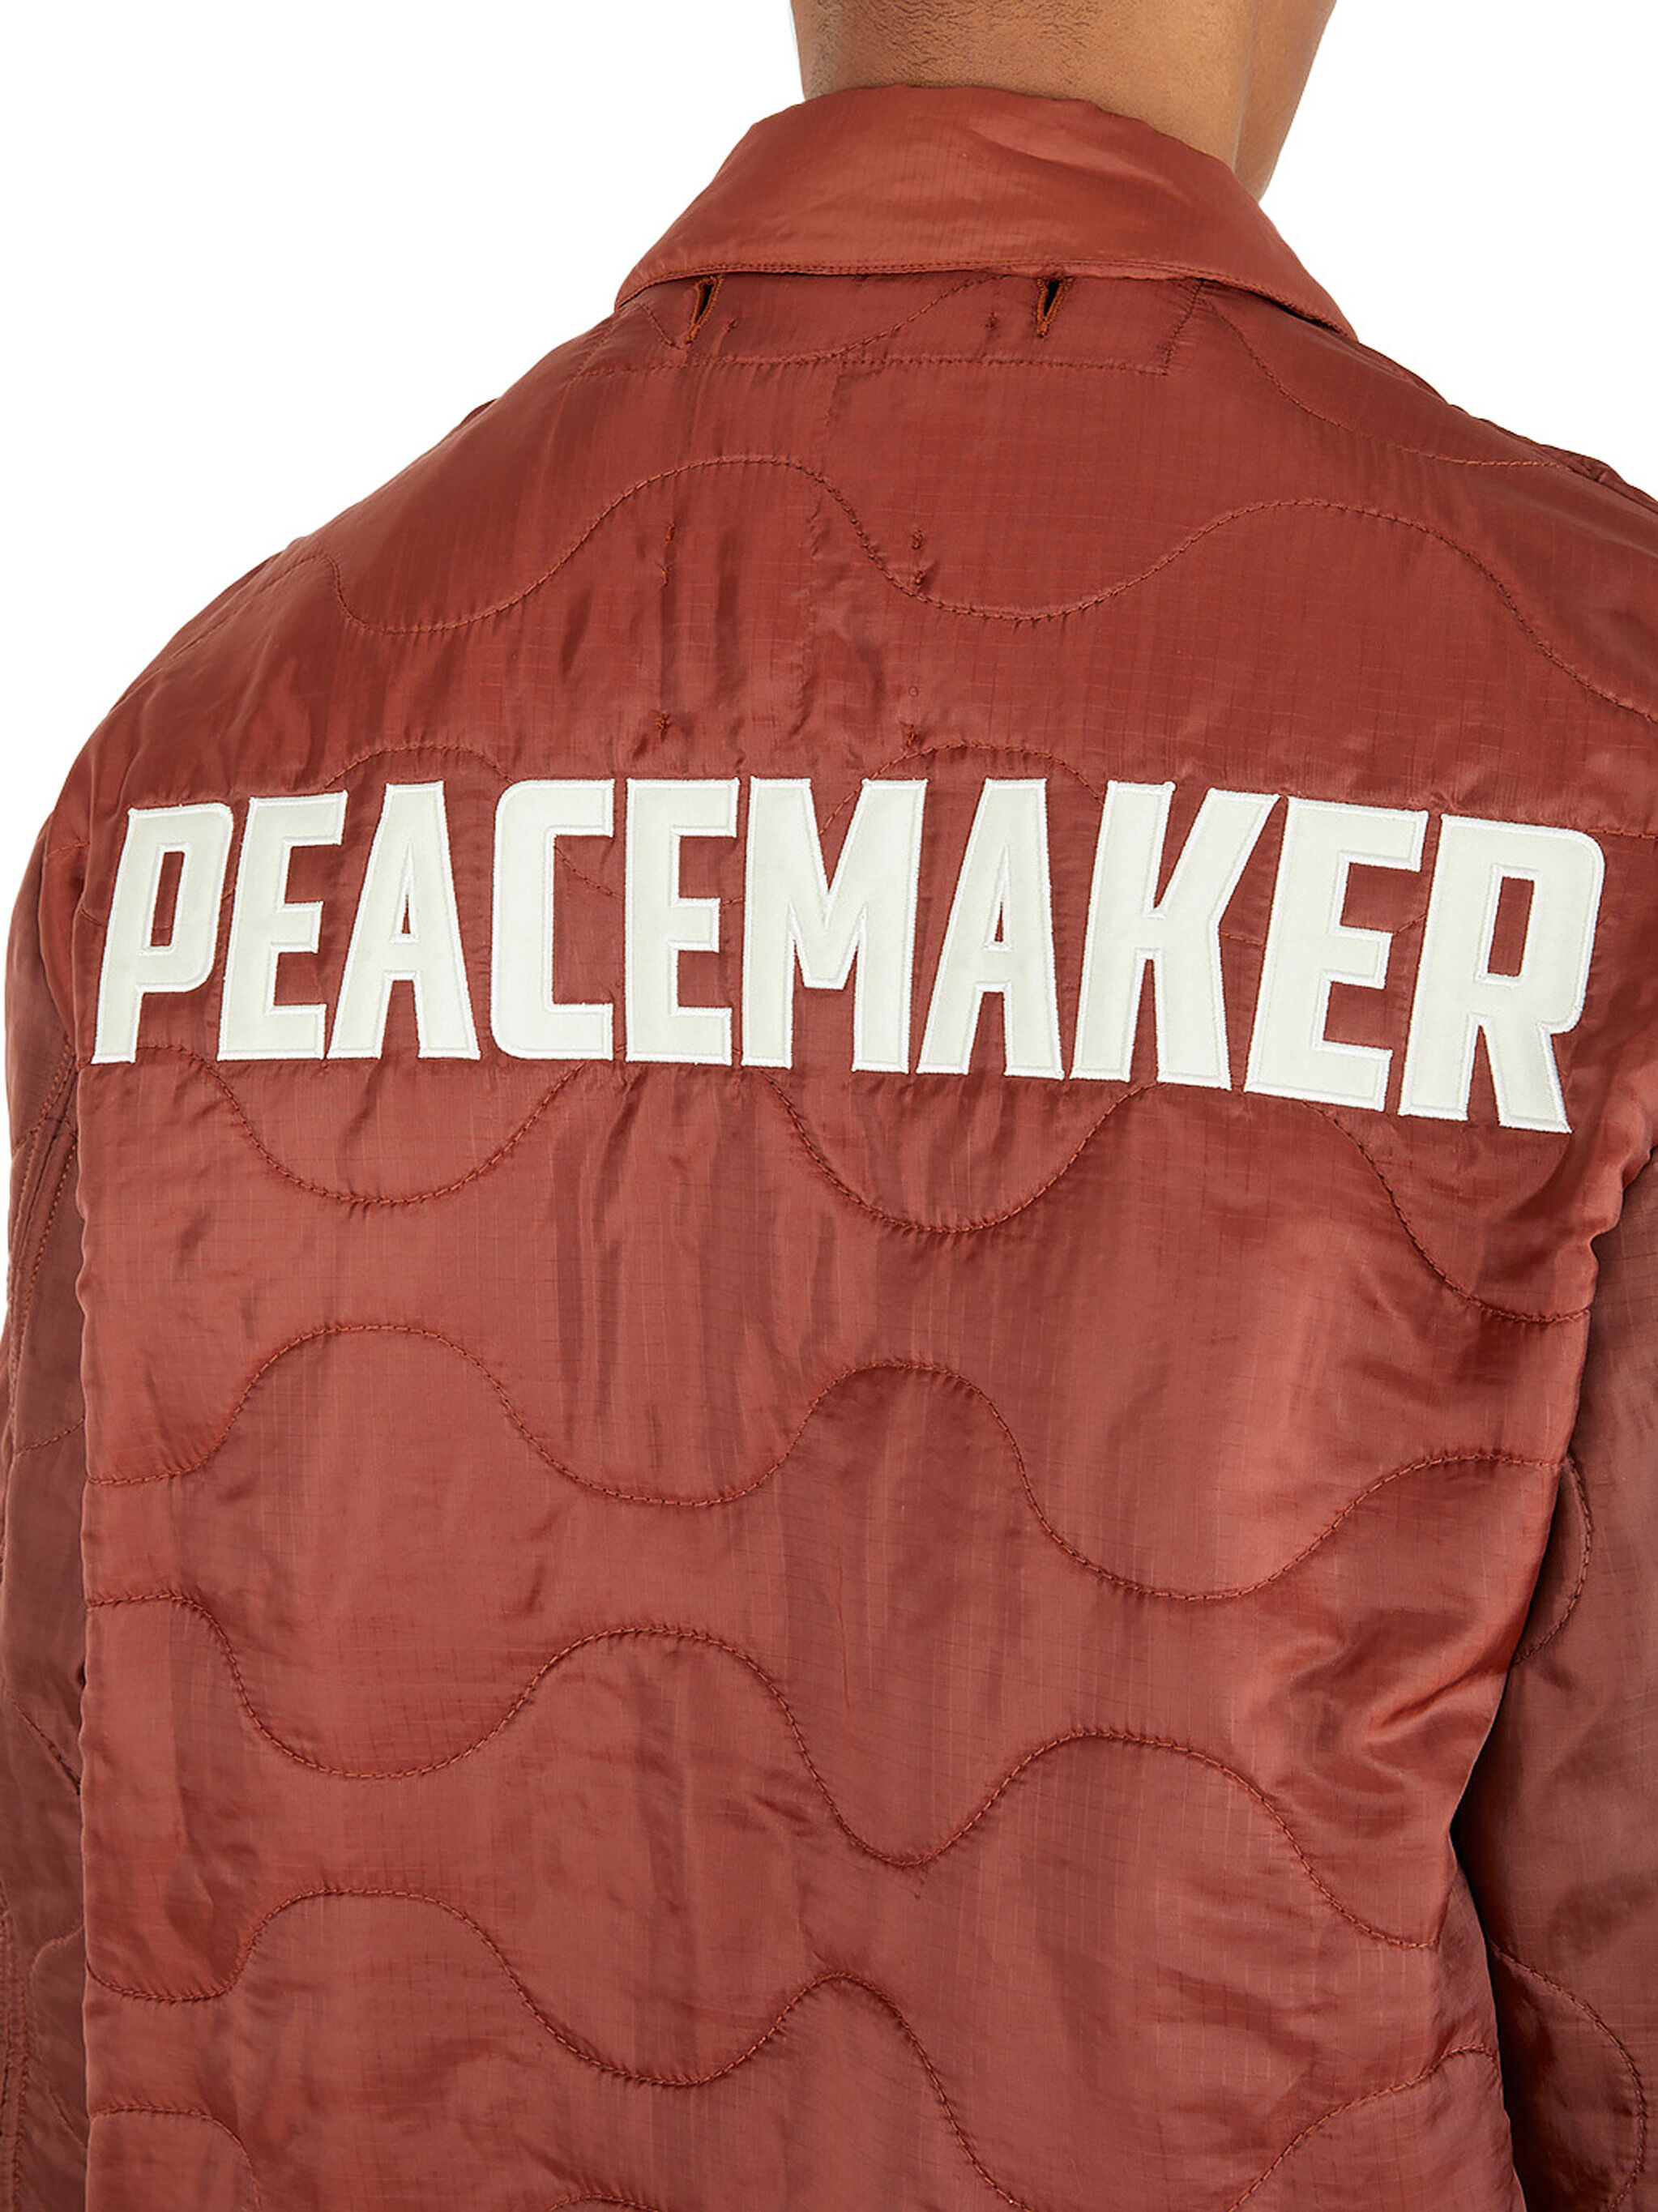 M OAMC PEACEMAKER WORK QUILTED レッドオスモのアウター